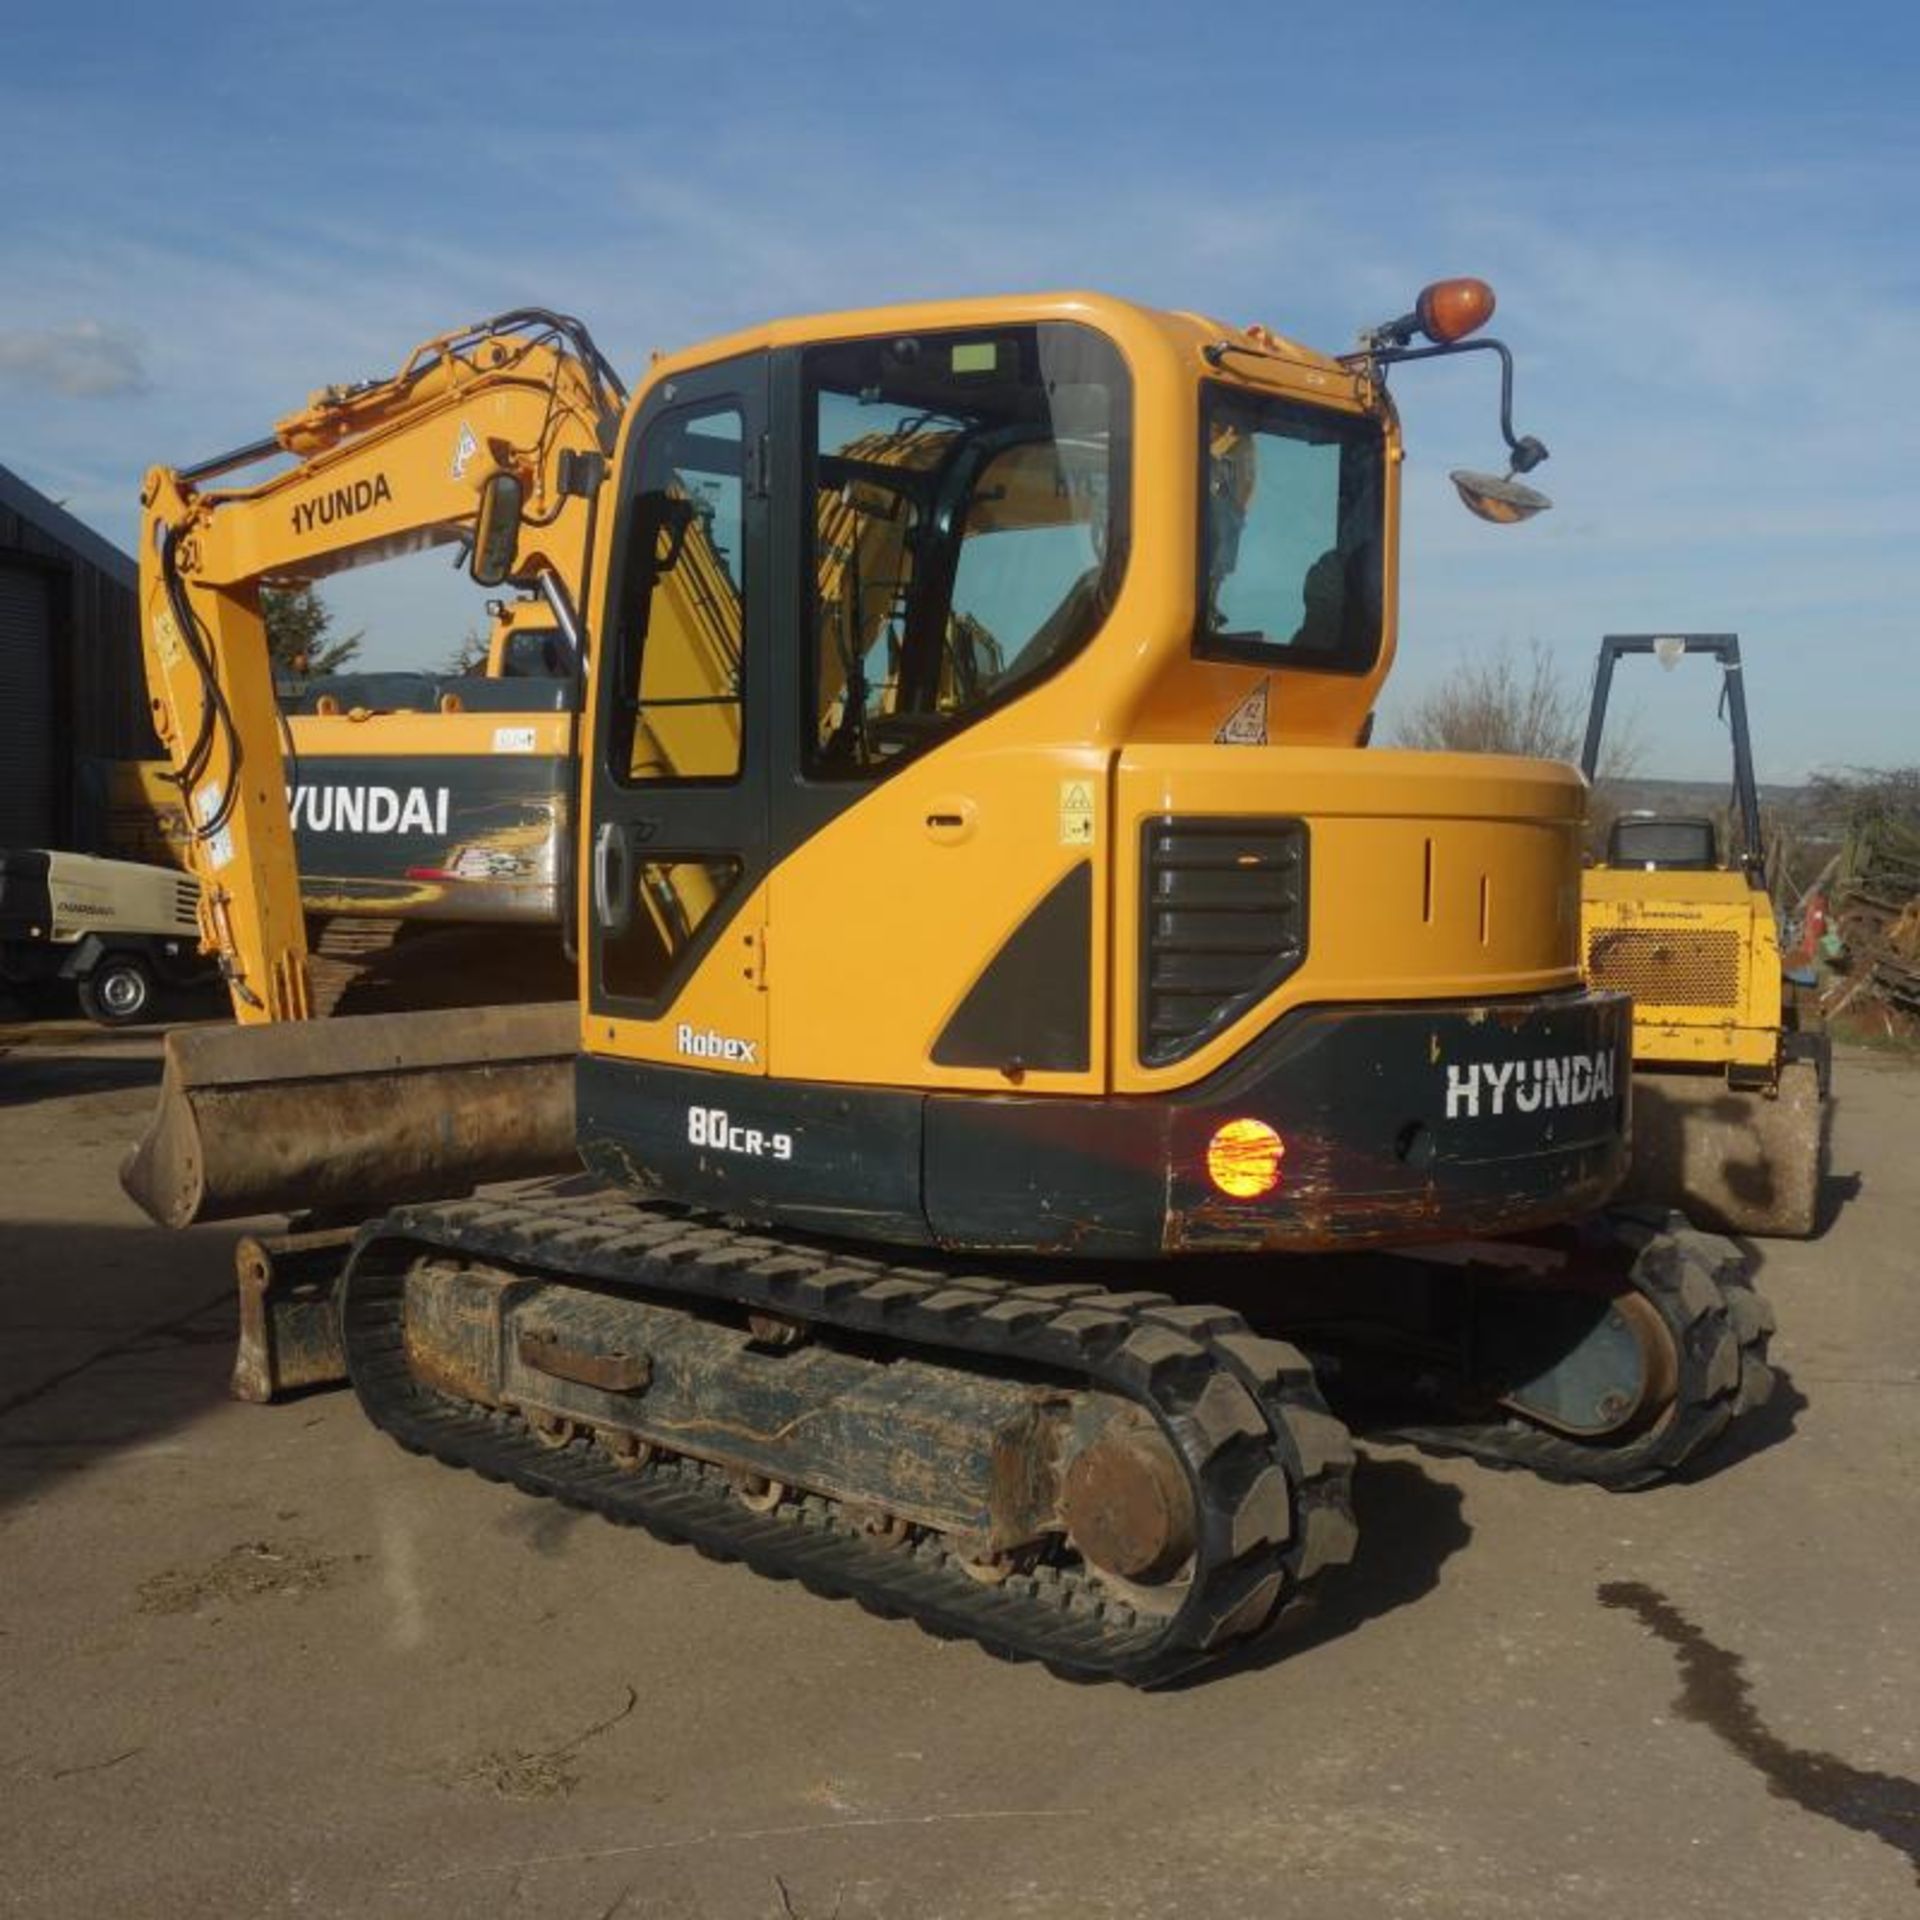 2014 Hyundai 80CR-9 Digger, Comes With 4 Buckets, 2290 Hours From New - Image 3 of 10